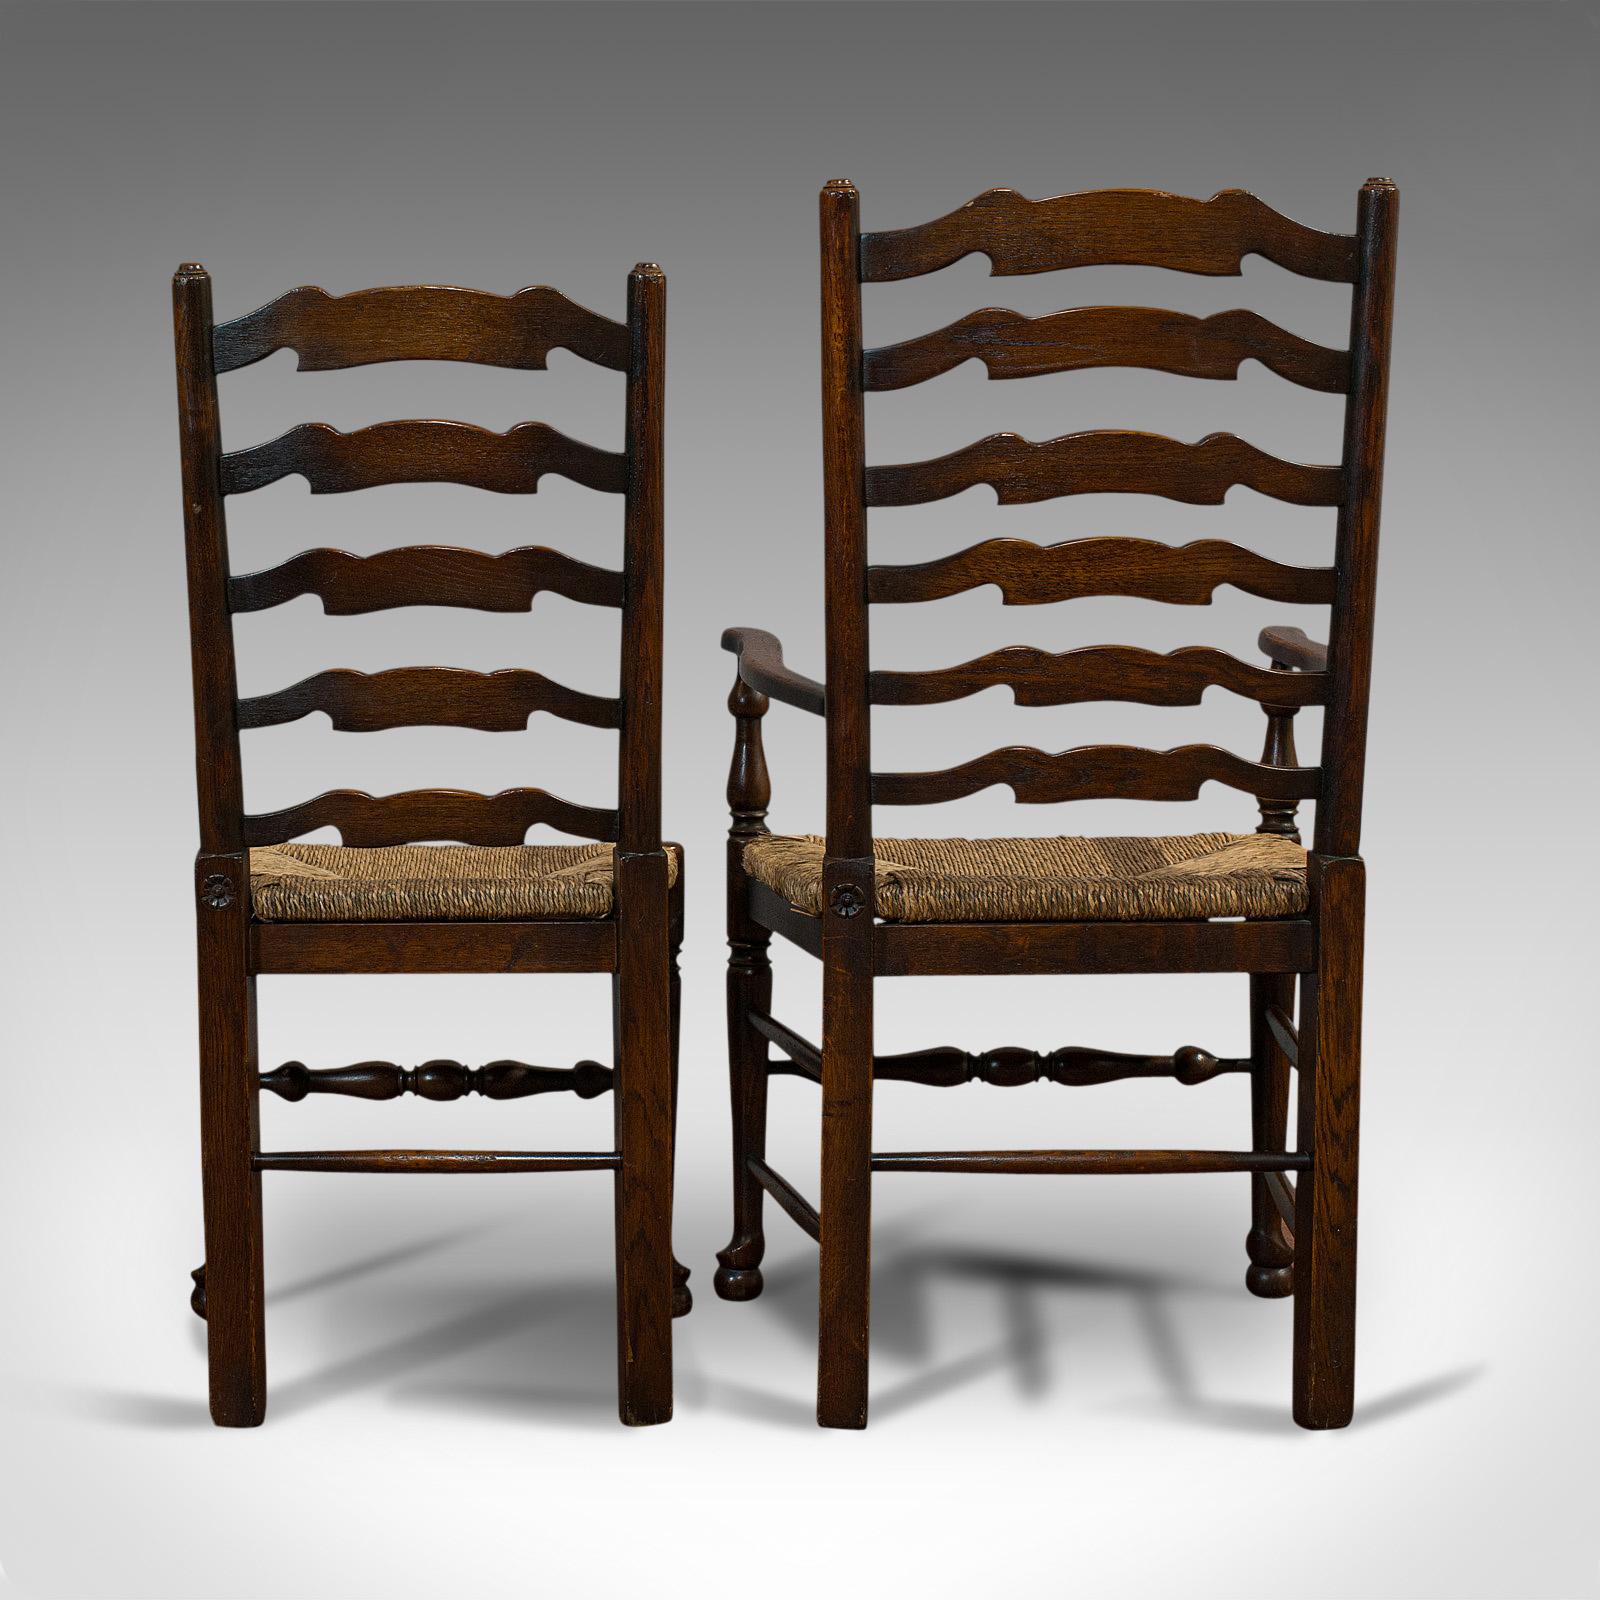 Early 20th Century Set of 6, Antique Ladderback Dining Chairs, Oak, Rush Seat, Carver, Edwardian